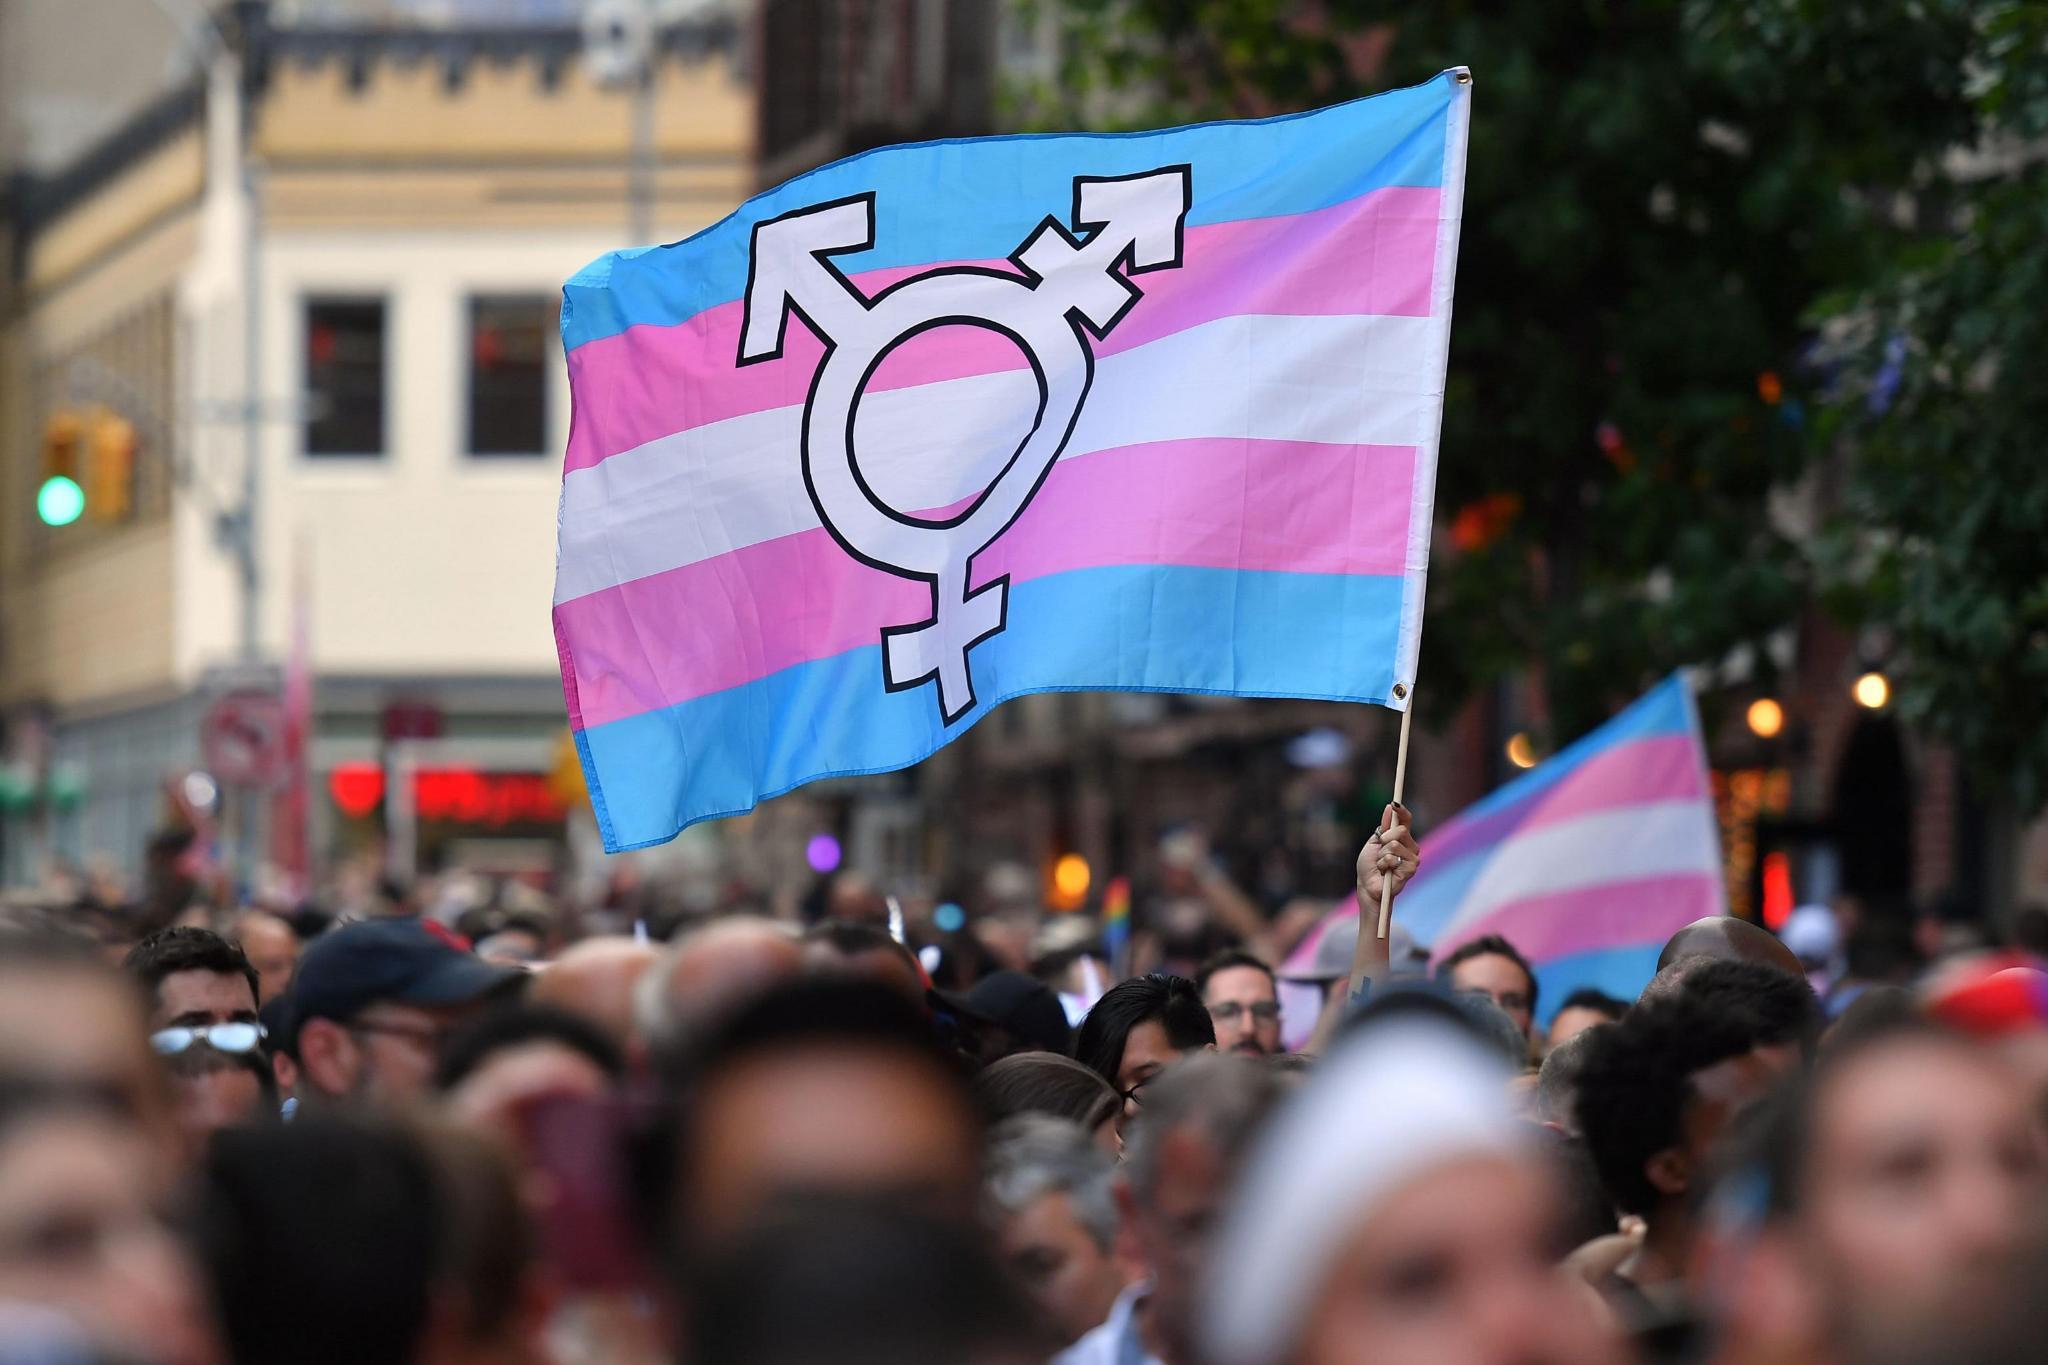 We all know the UK is transphobic, but what can transgender workers do about it?